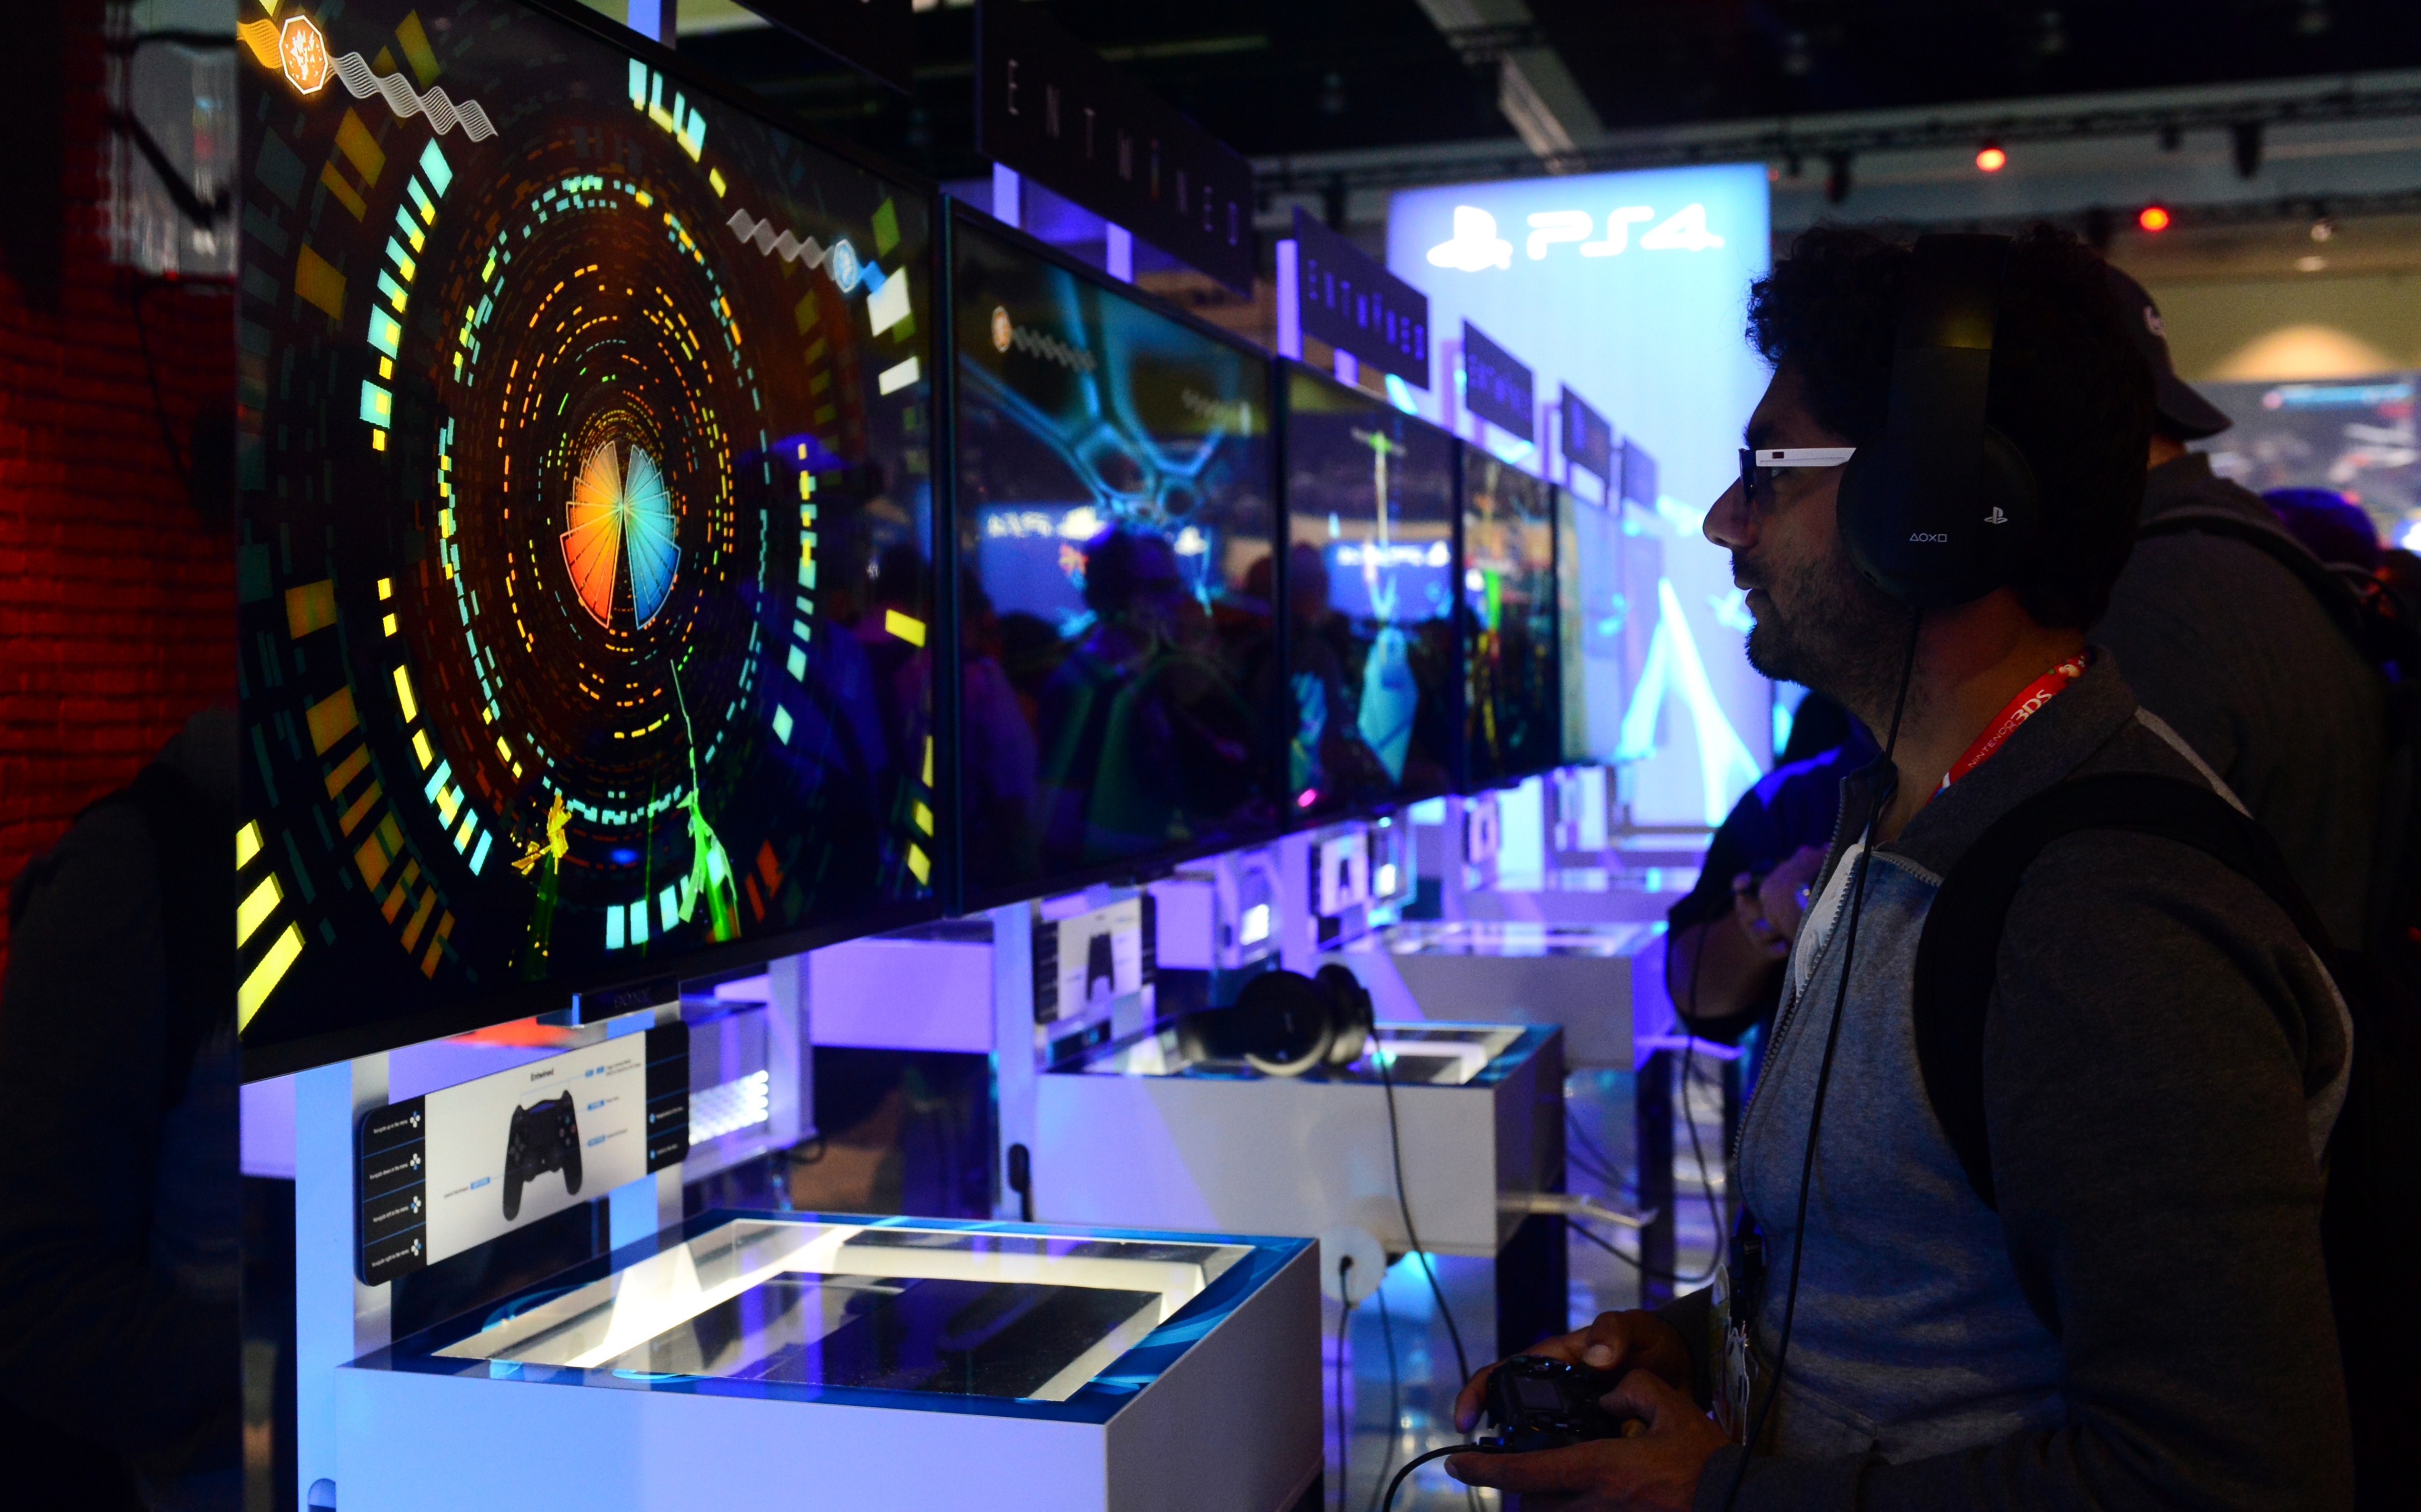 A gamer plays 'Entwined' on Sony's PS4 at annual E3 video game extravaganza in Los Angeles on June 10, 2014. (Frederic J. Brown—Getty Images)